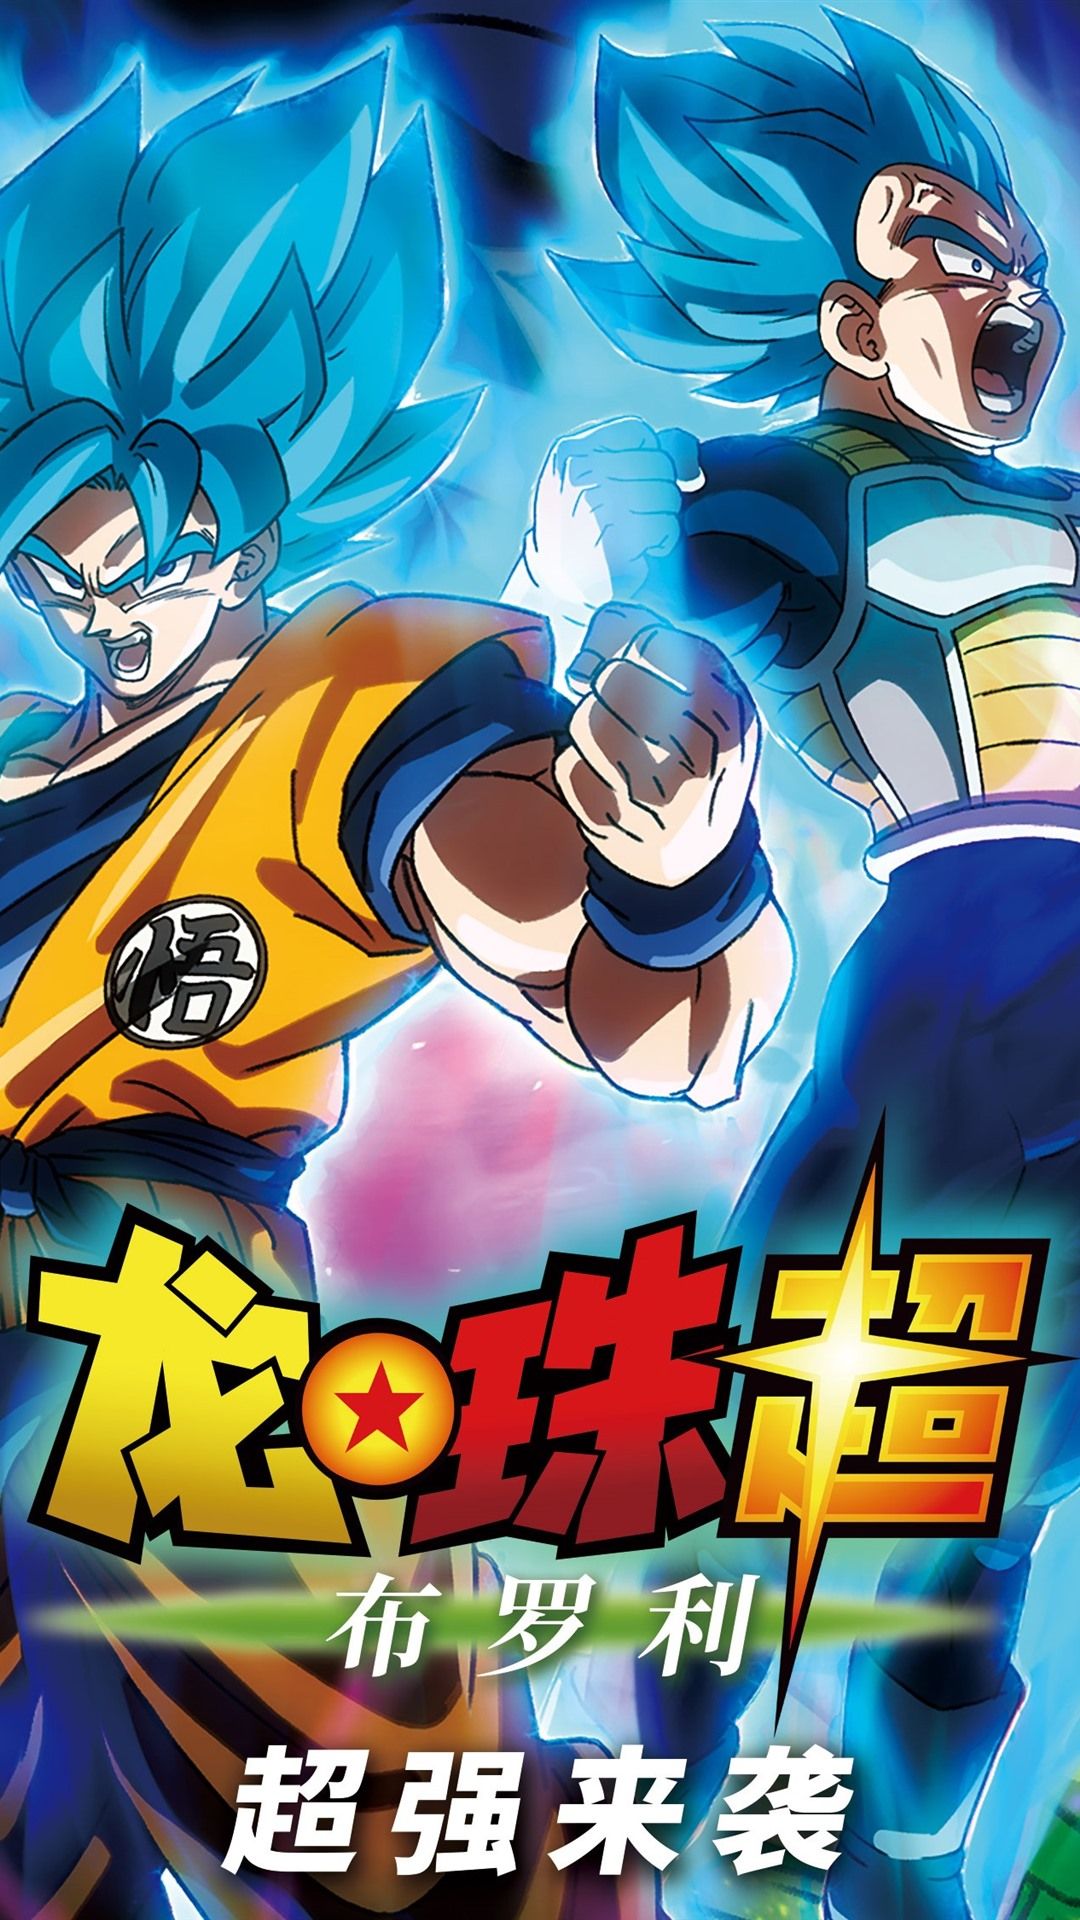 Dragon Ball Super: Broly 1080x1920 iPhone 8/7/6/6S Plus wallpapers